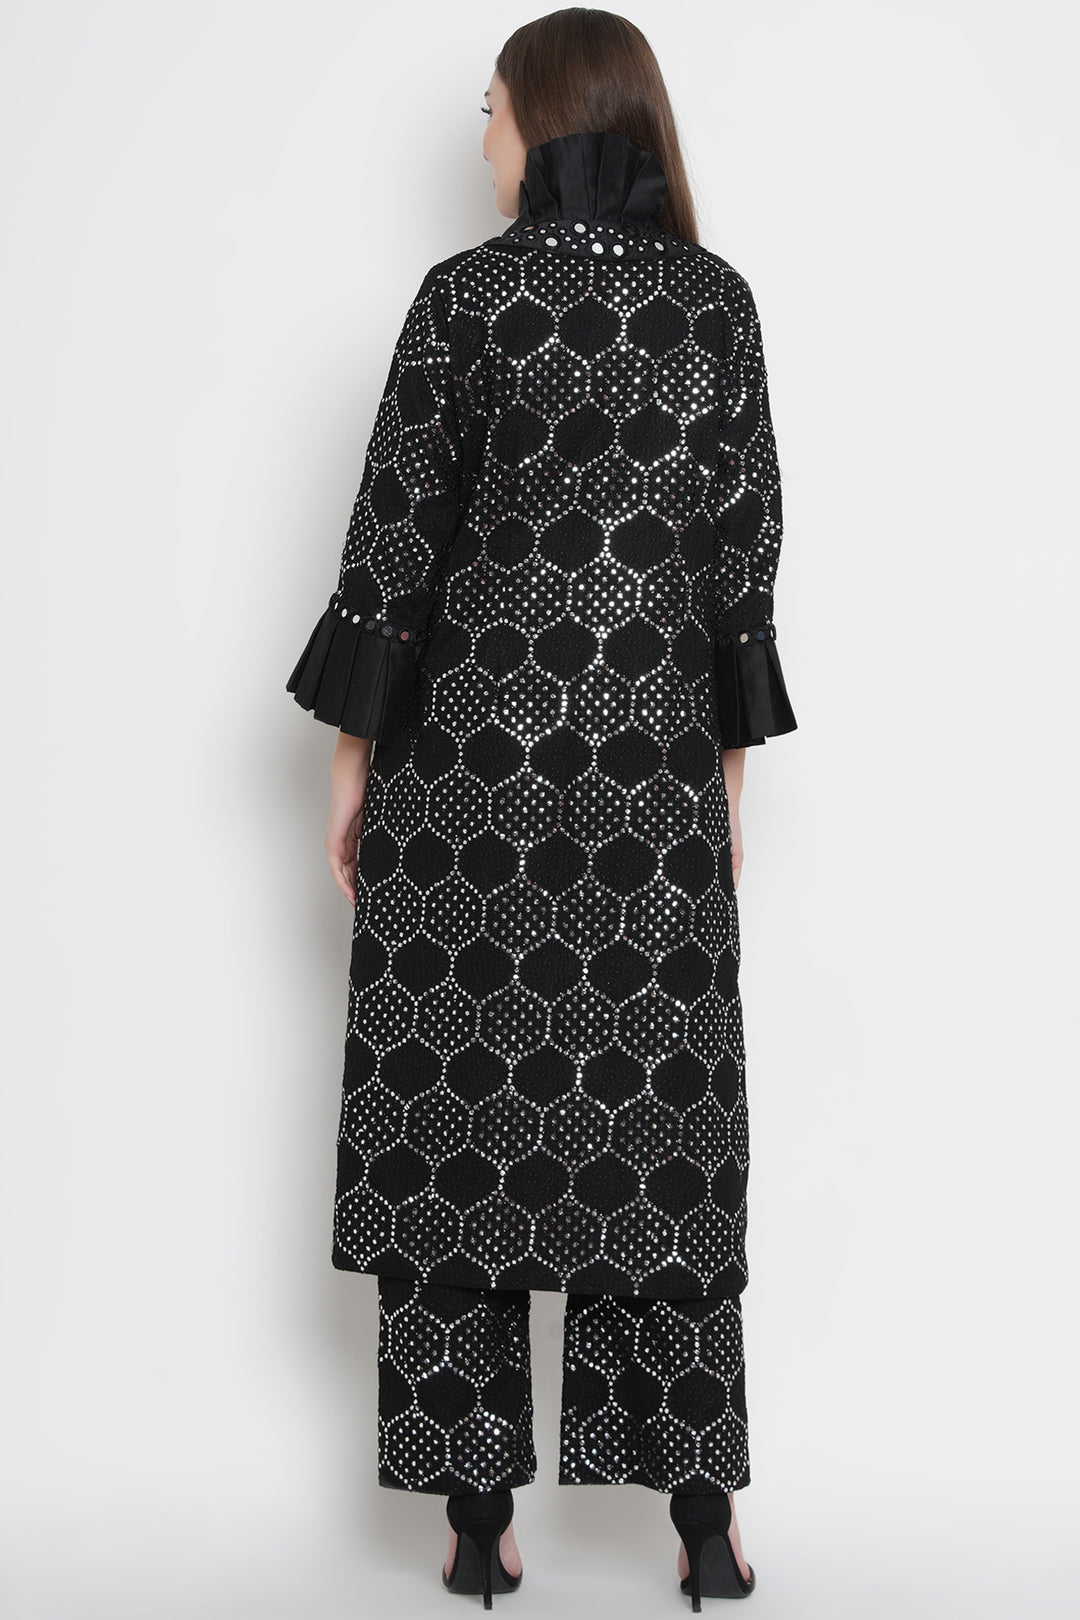 Black Mirrorwork Long Overlay Jacket with Monarch Collars